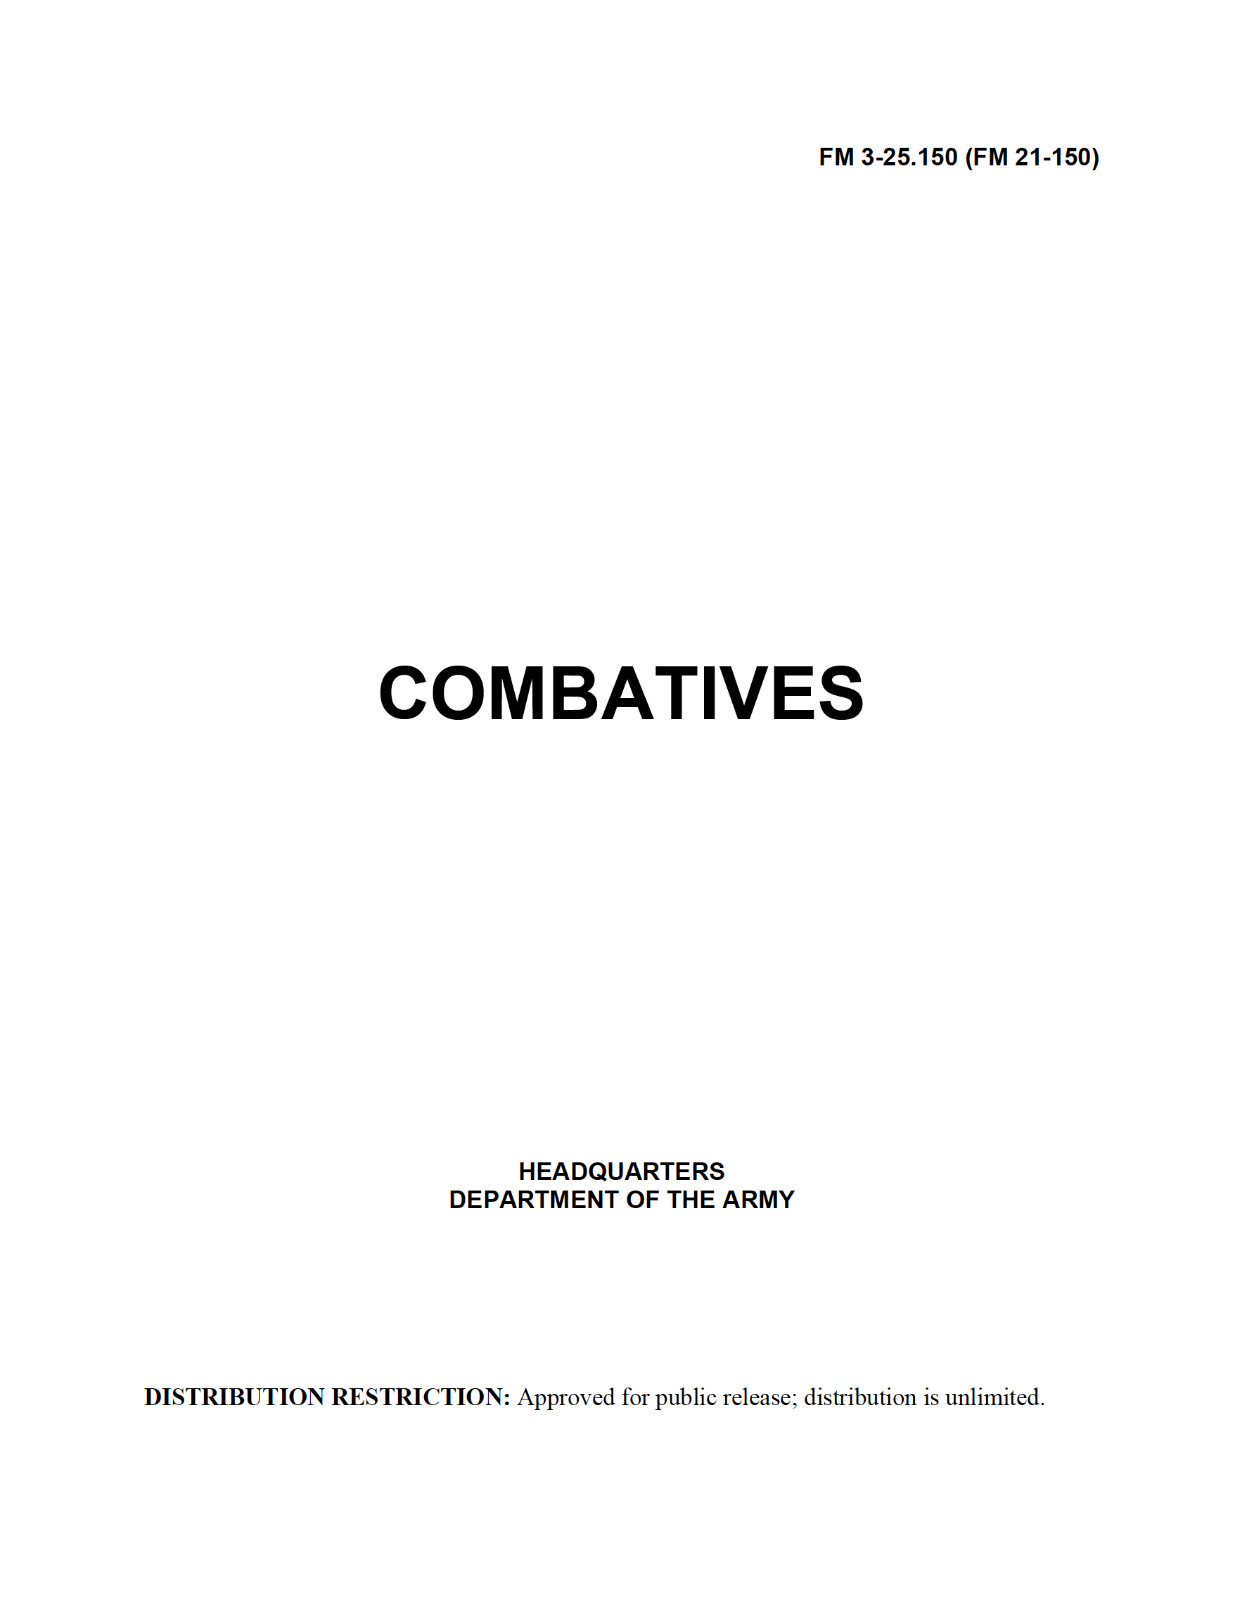 265 Page Army 2002 COMBATIVES 3-25.150 Illustrated Manual on Data CD 